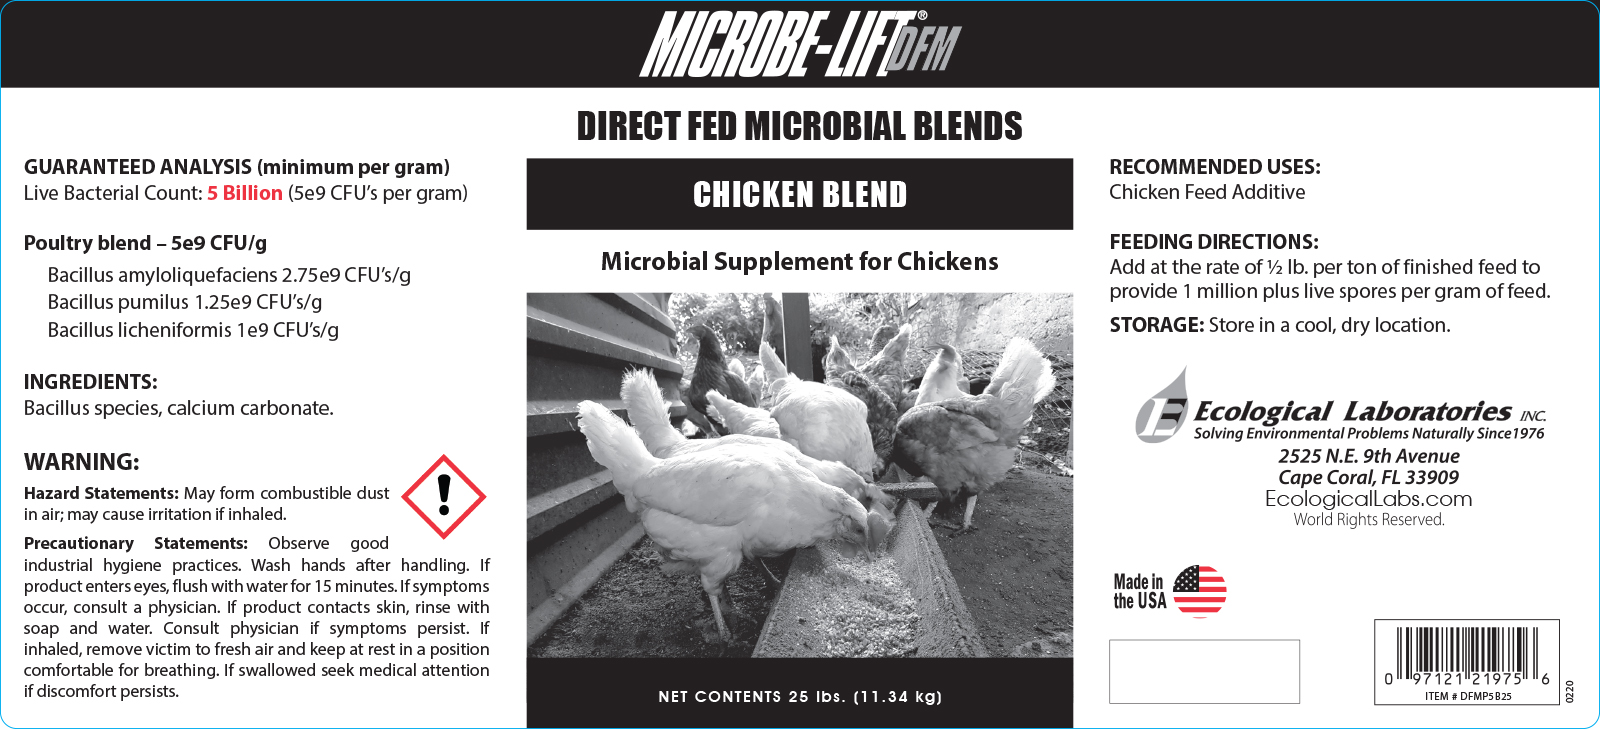 Effect of feeding direct fed microbial supplemented diet (DFMD